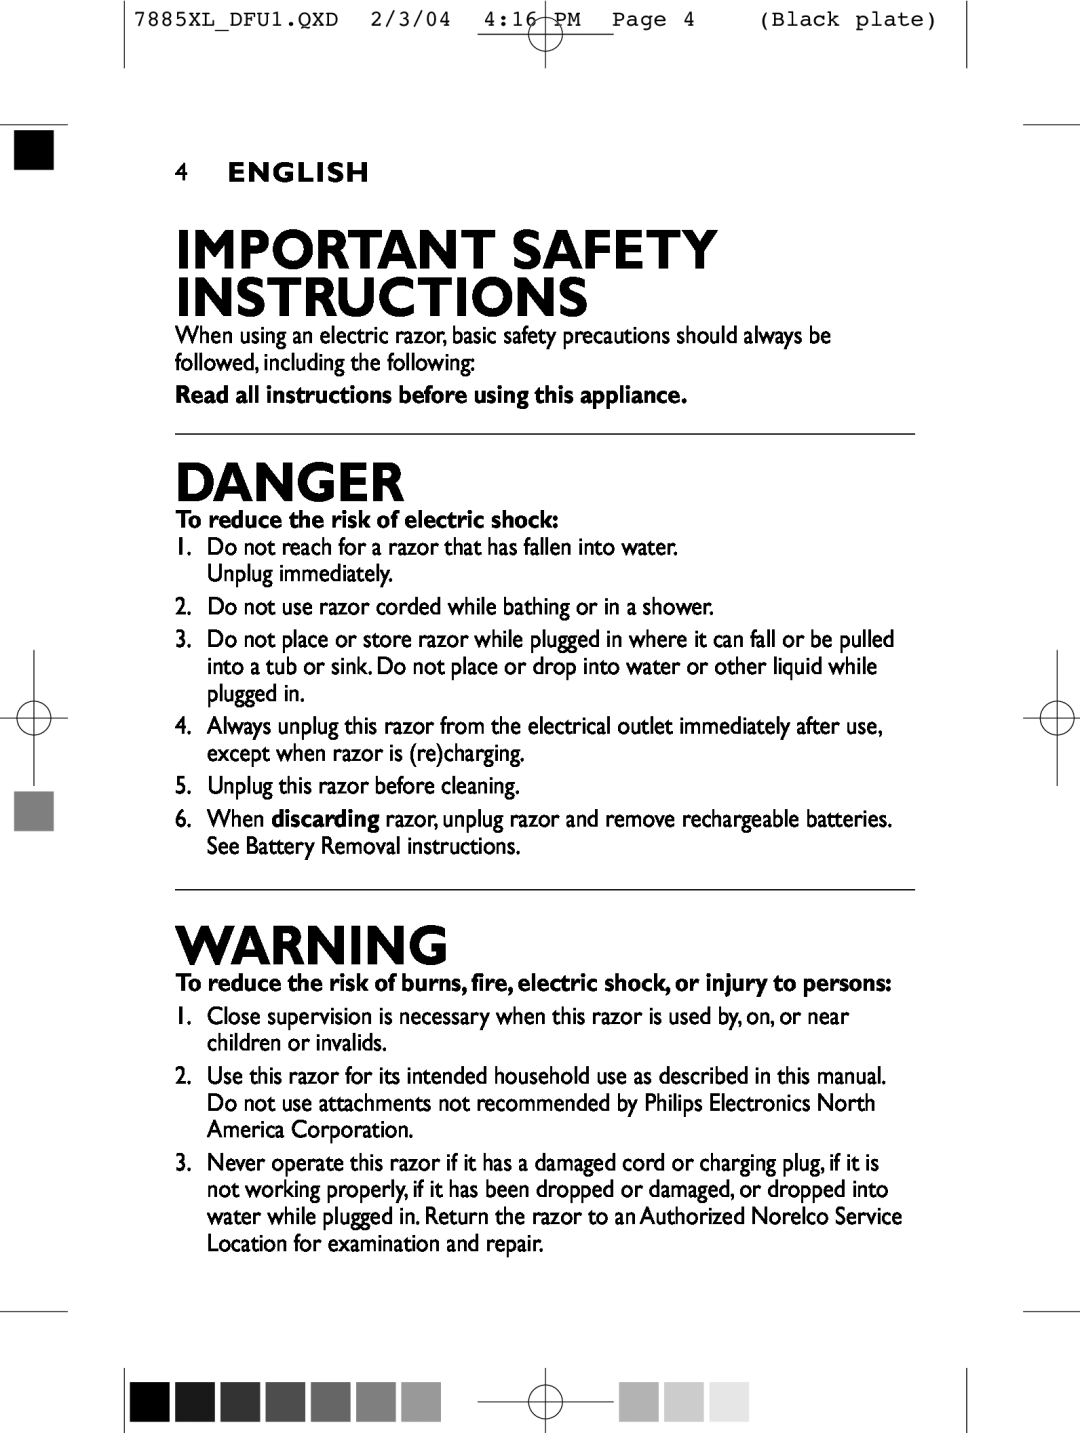 Philips 7886XL, 6887XL Important Safety Instructions, Danger, English, Read all instructions before using this appliance 